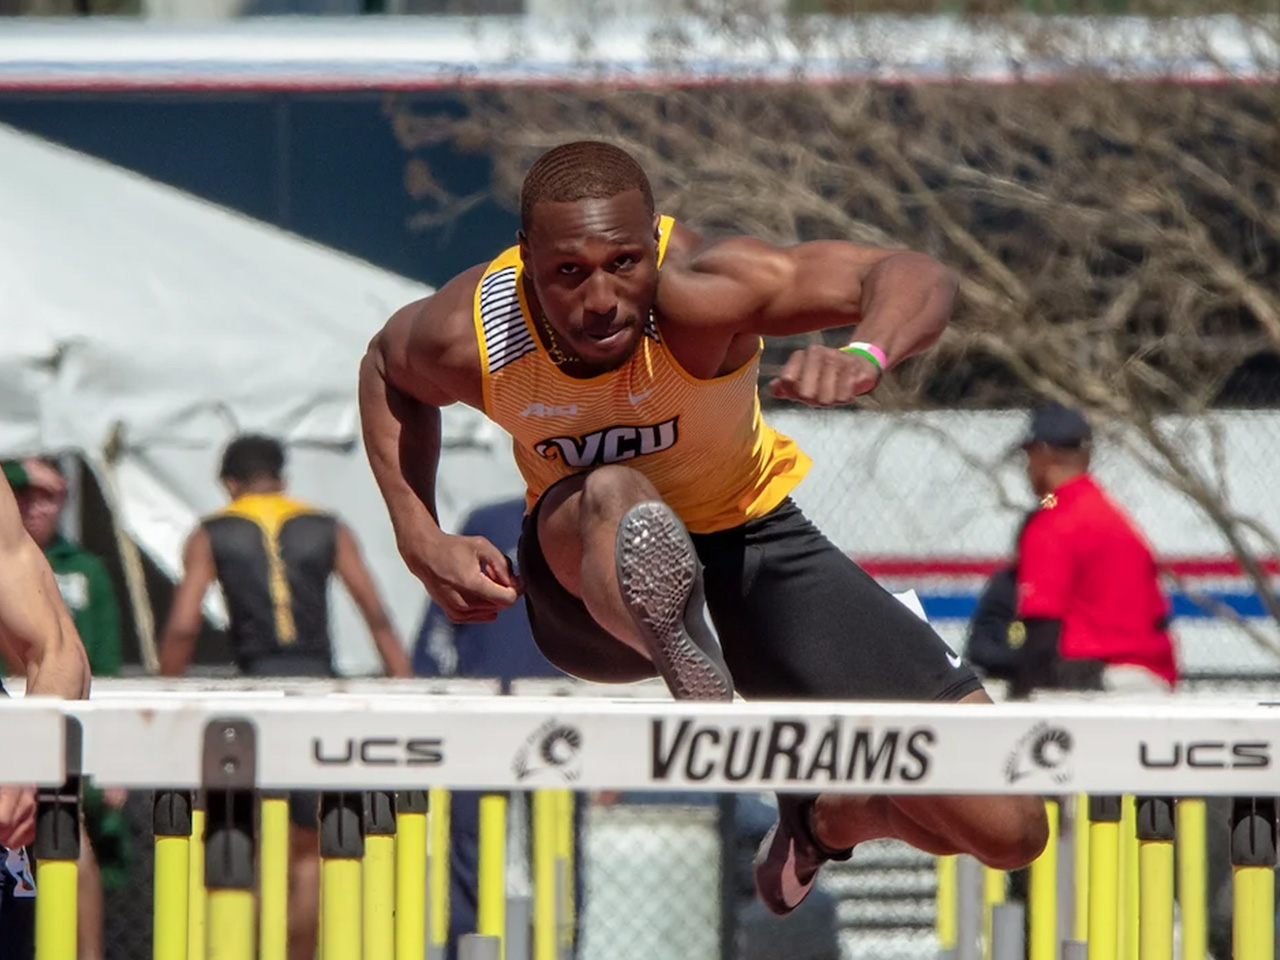 Student athlete competing in hurdles event